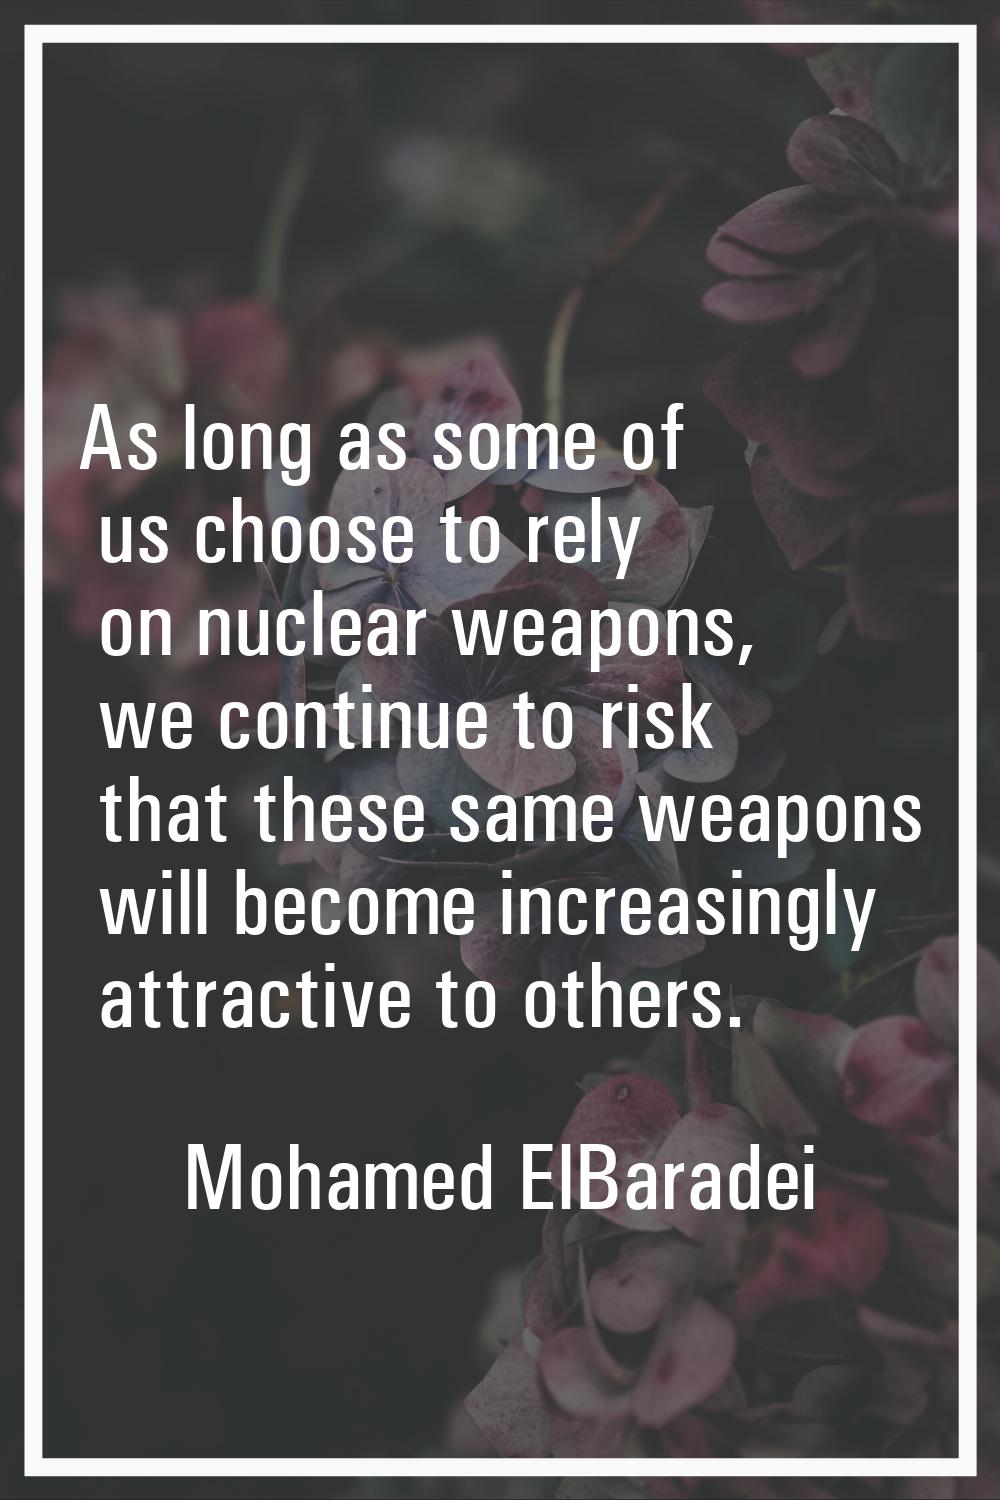 As long as some of us choose to rely on nuclear weapons, we continue to risk that these same weapon